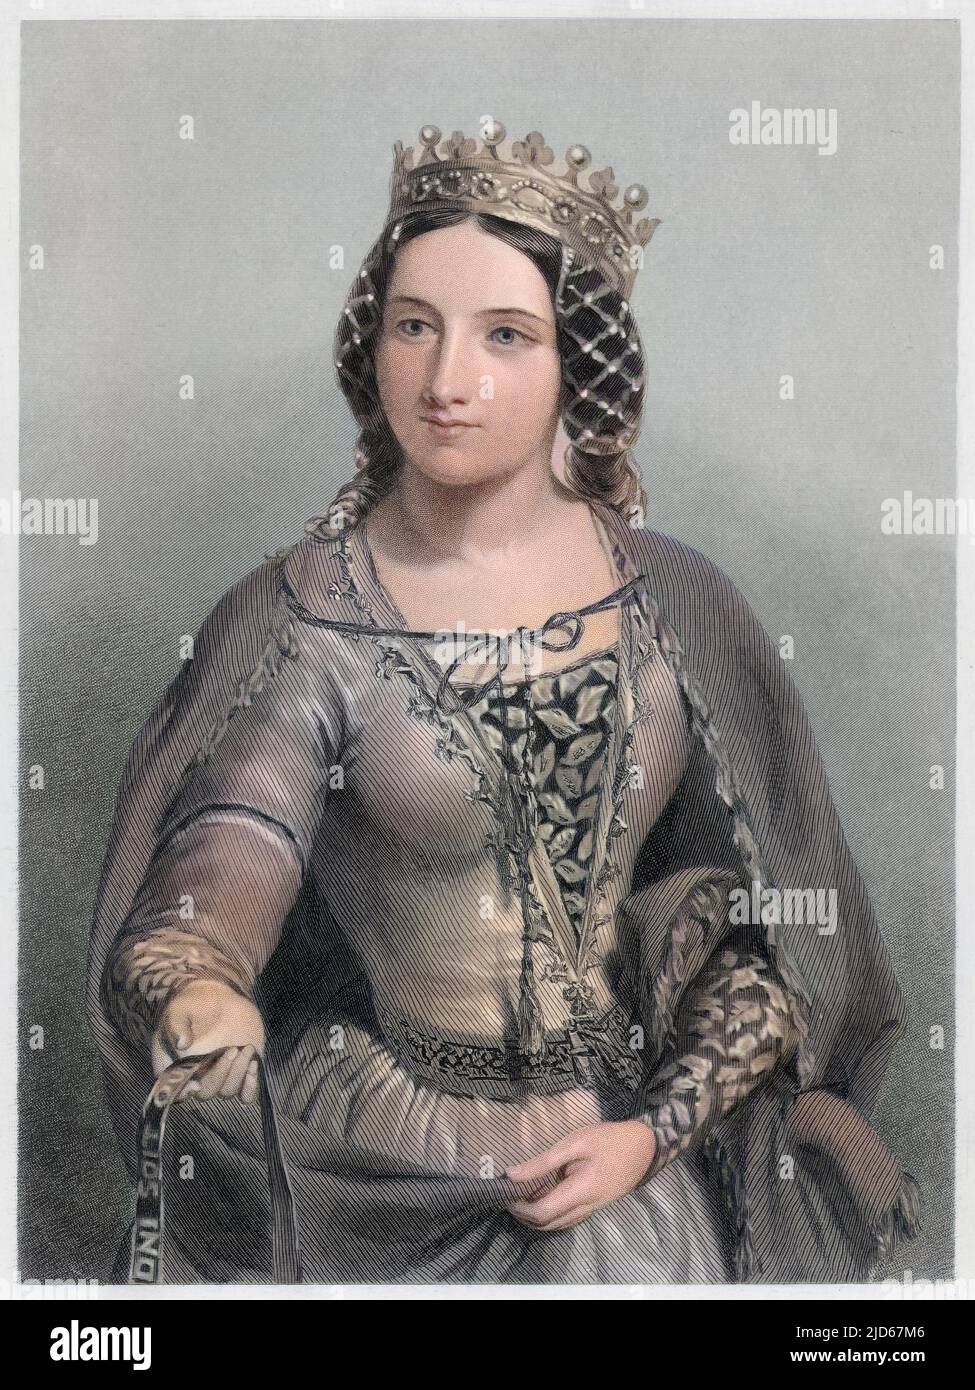 ANNE NEVILLE(1456 - 1485), QUEEN OF RICHARD III. Colourised version of : 10021632 Stock Photo